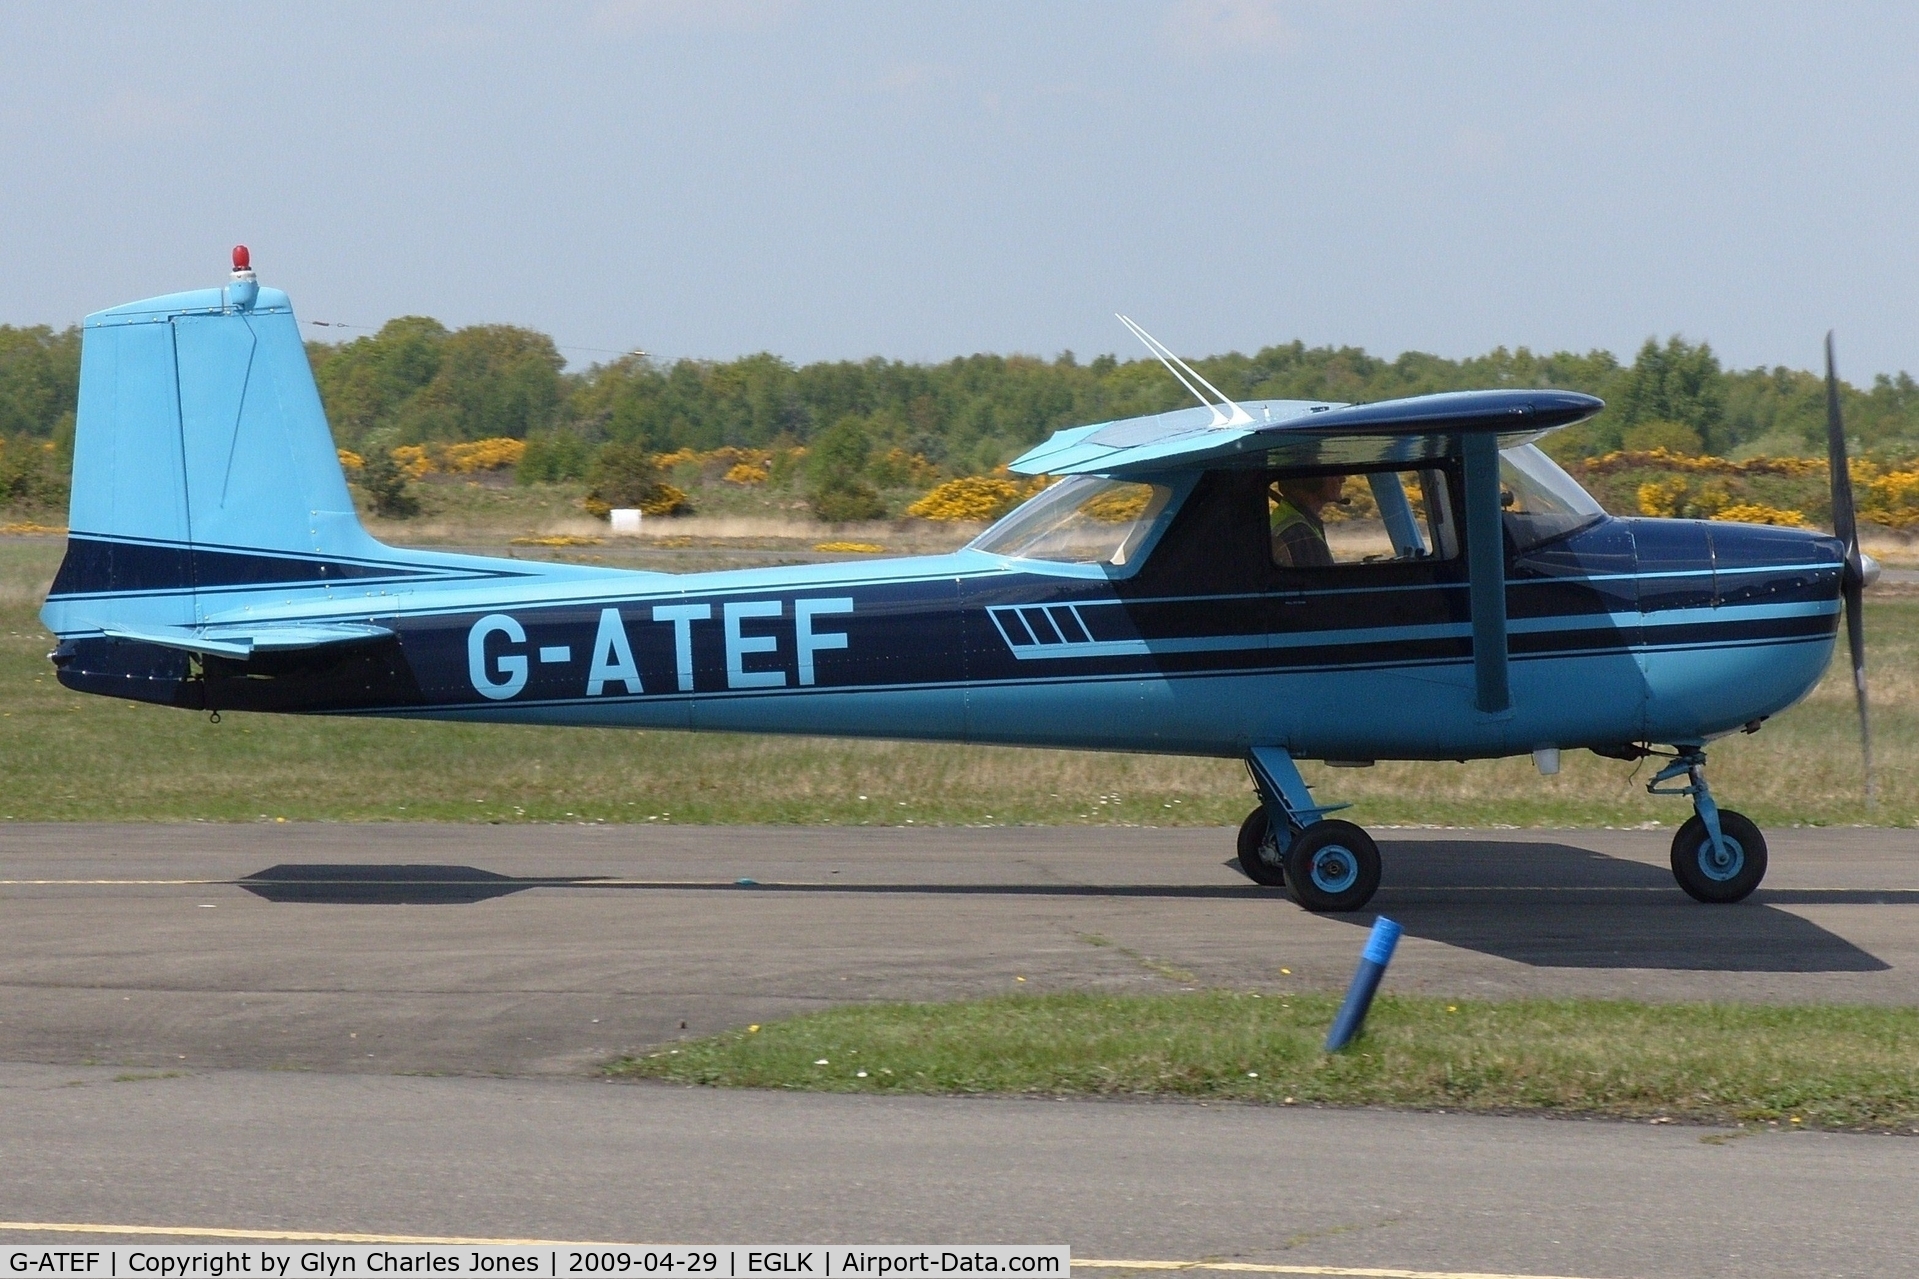 G-ATEF, 1965 Cessna 150E C/N 150-61378, Previously N3978U. Owned by Swans Aviation. Good to see this lovely little Cessna on the move, even the marker post matches its bright blue scheme.